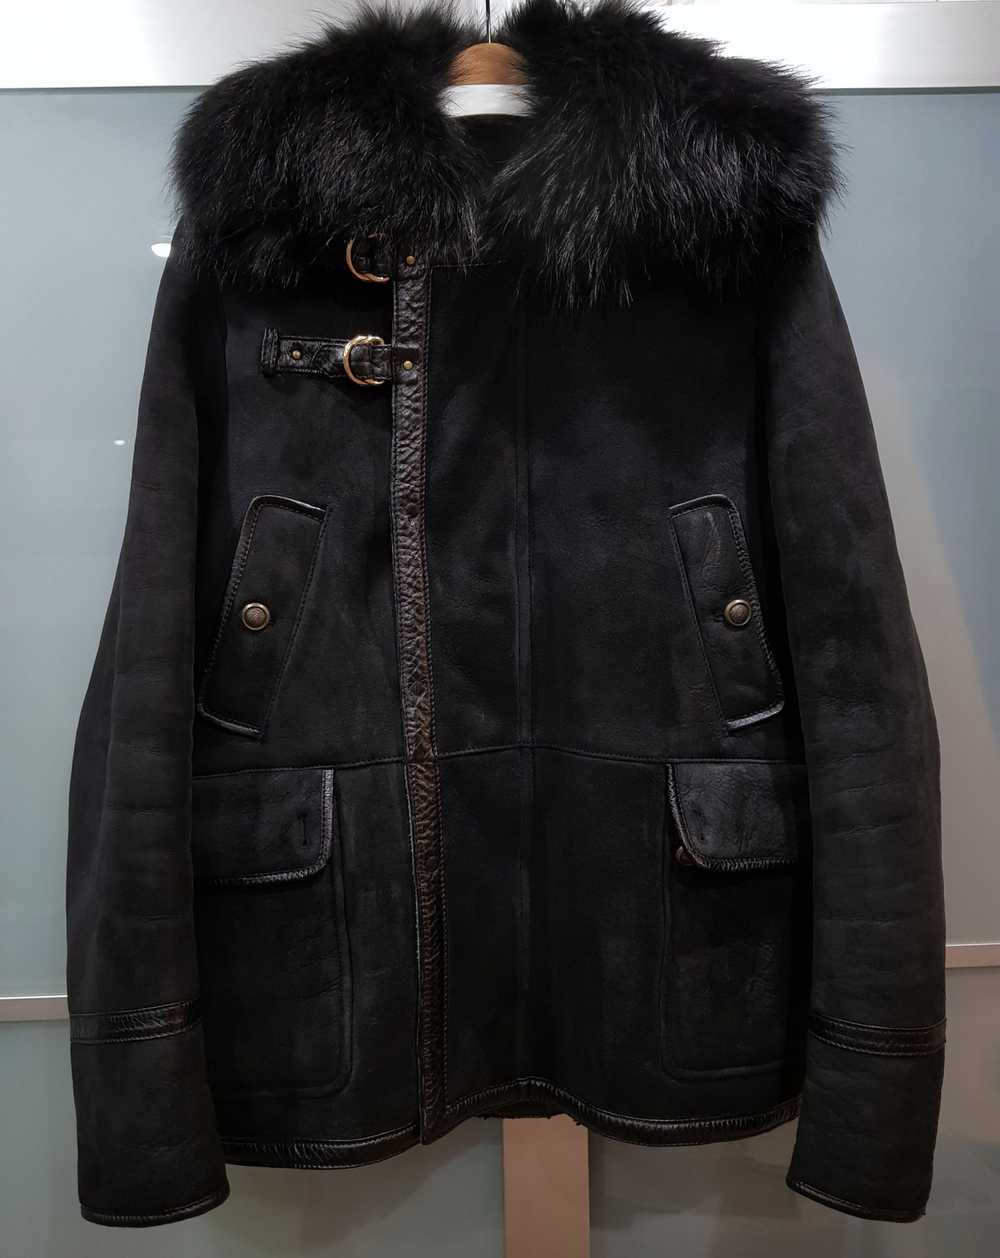 Gucci $8k Fur Collar Shearling Leather Jacket - G… - image 1